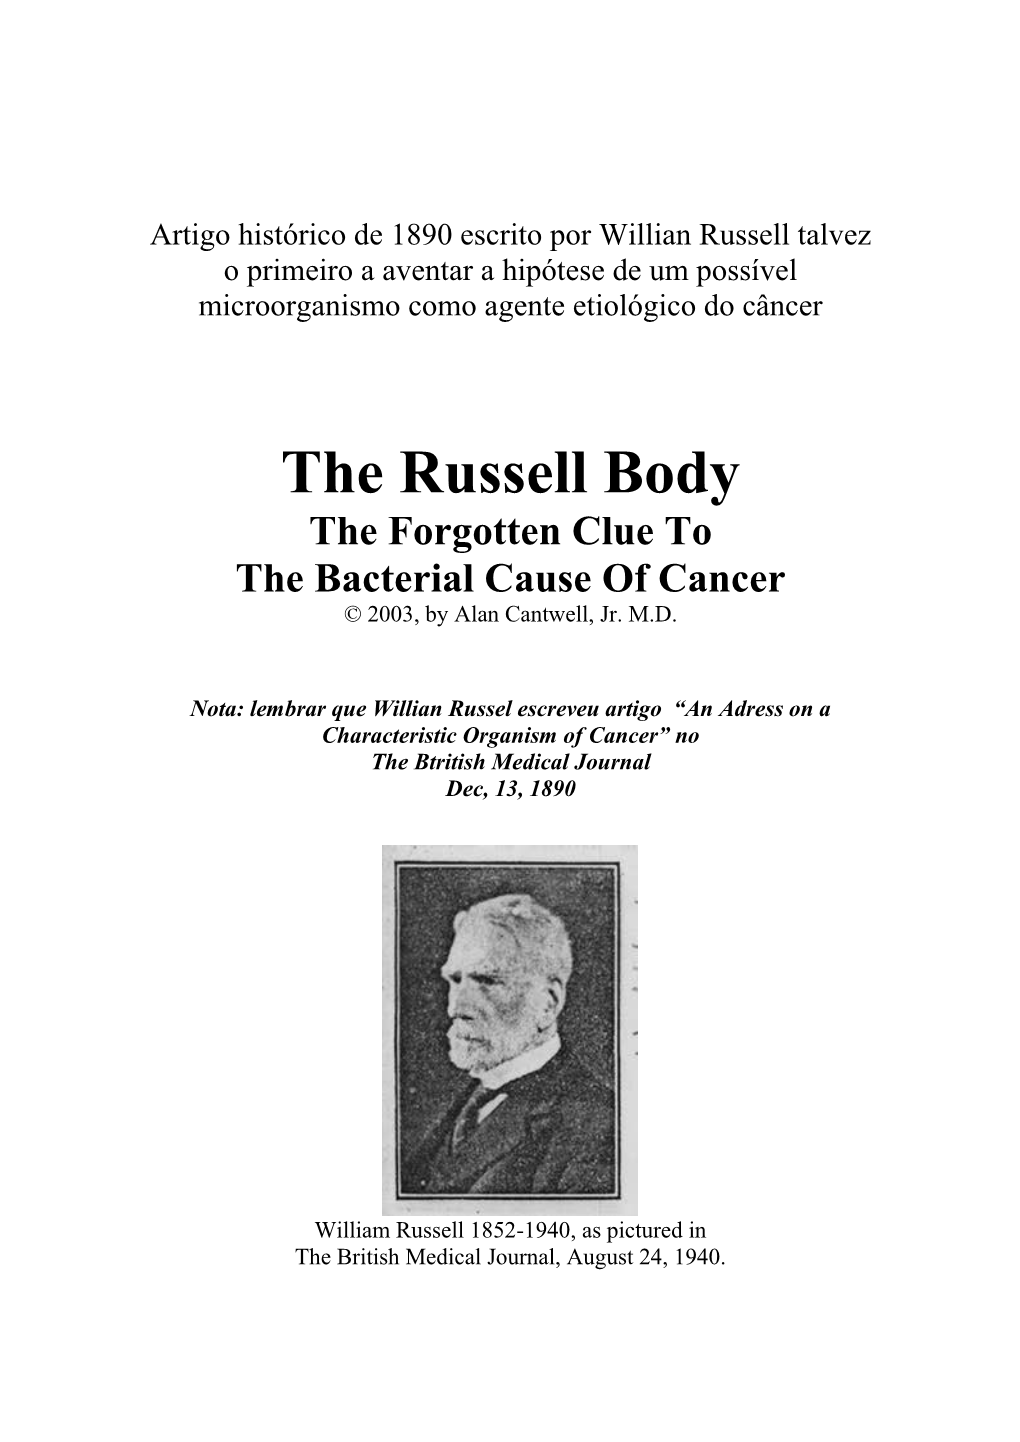 The Russell Body the Forgotten Clue to the Bacterial Cause of Cancer © 2003, by Alan Cantwell, Jr